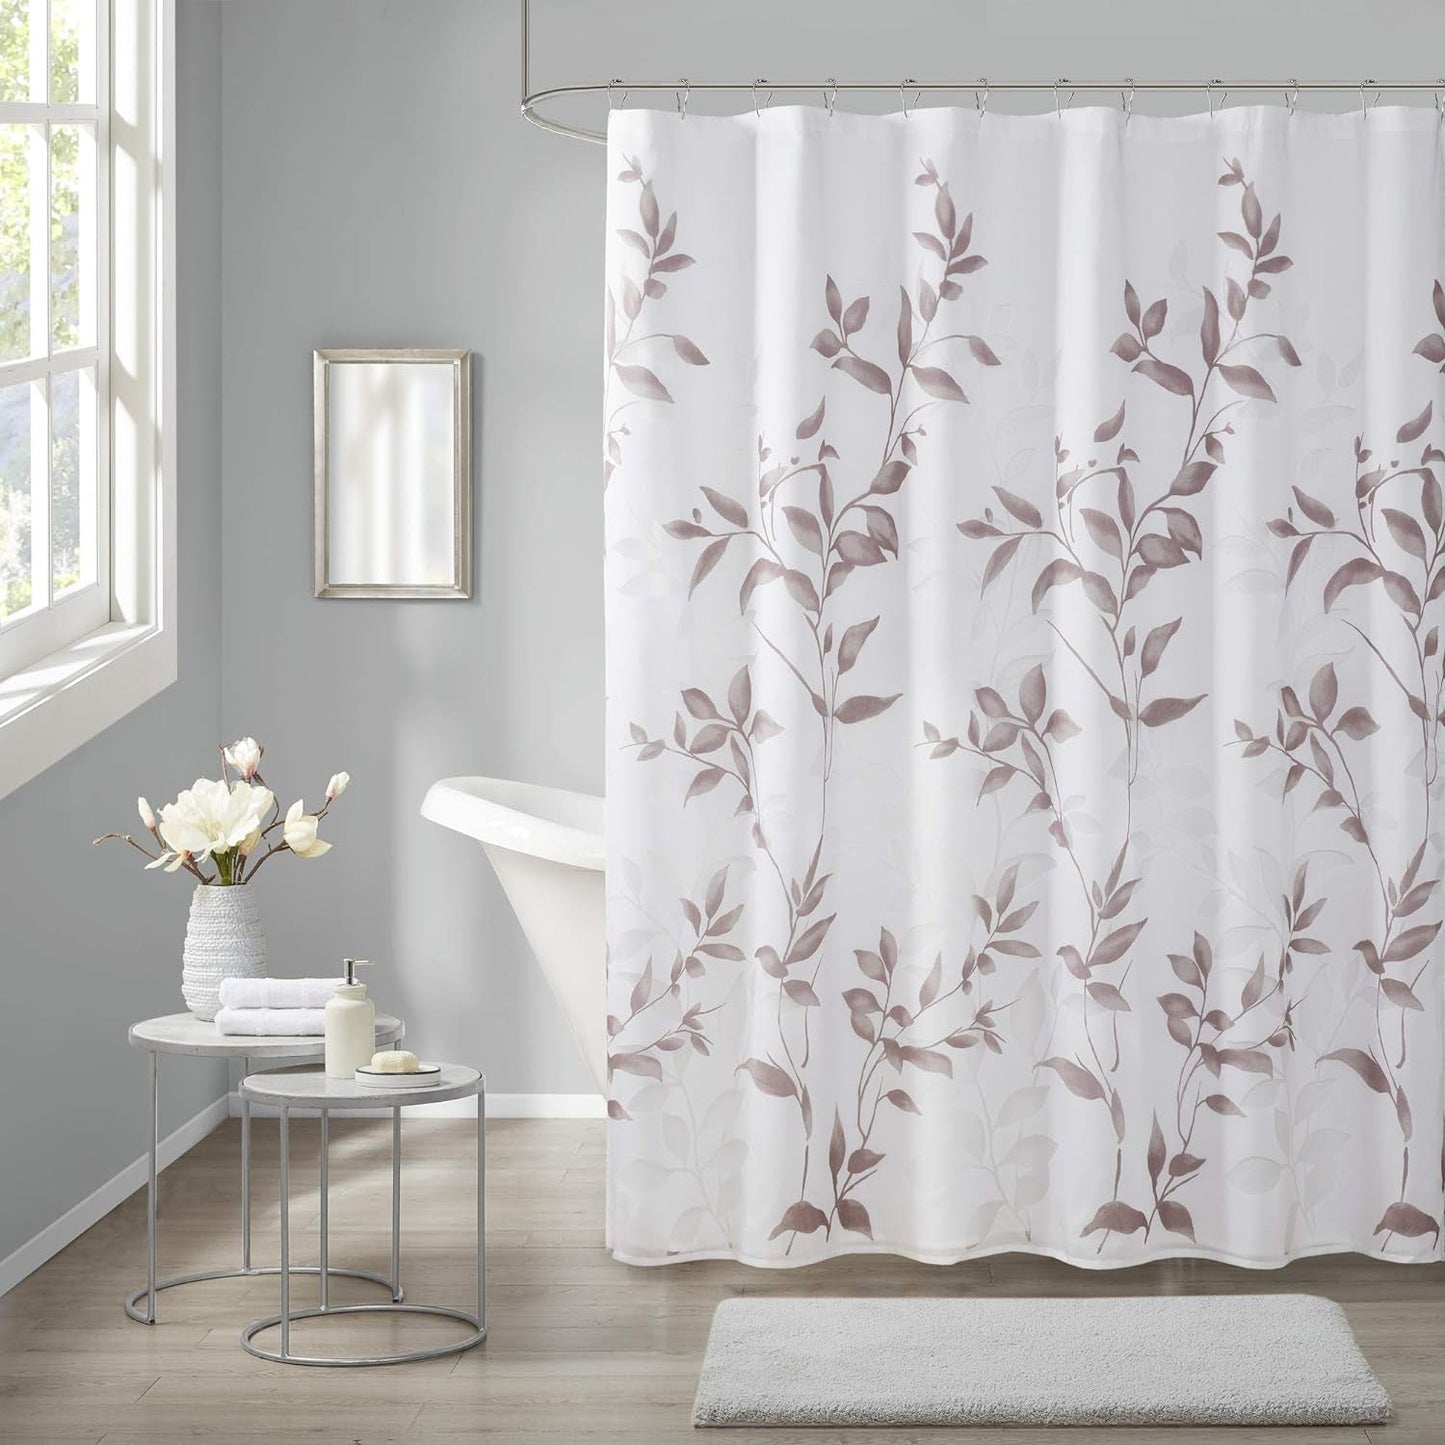 Madison Park Cecily Botanical Modern Shower Curtain, Contemporary Design Water Repellent Shower Curtains for Bathroom, 72 X 72, Grey